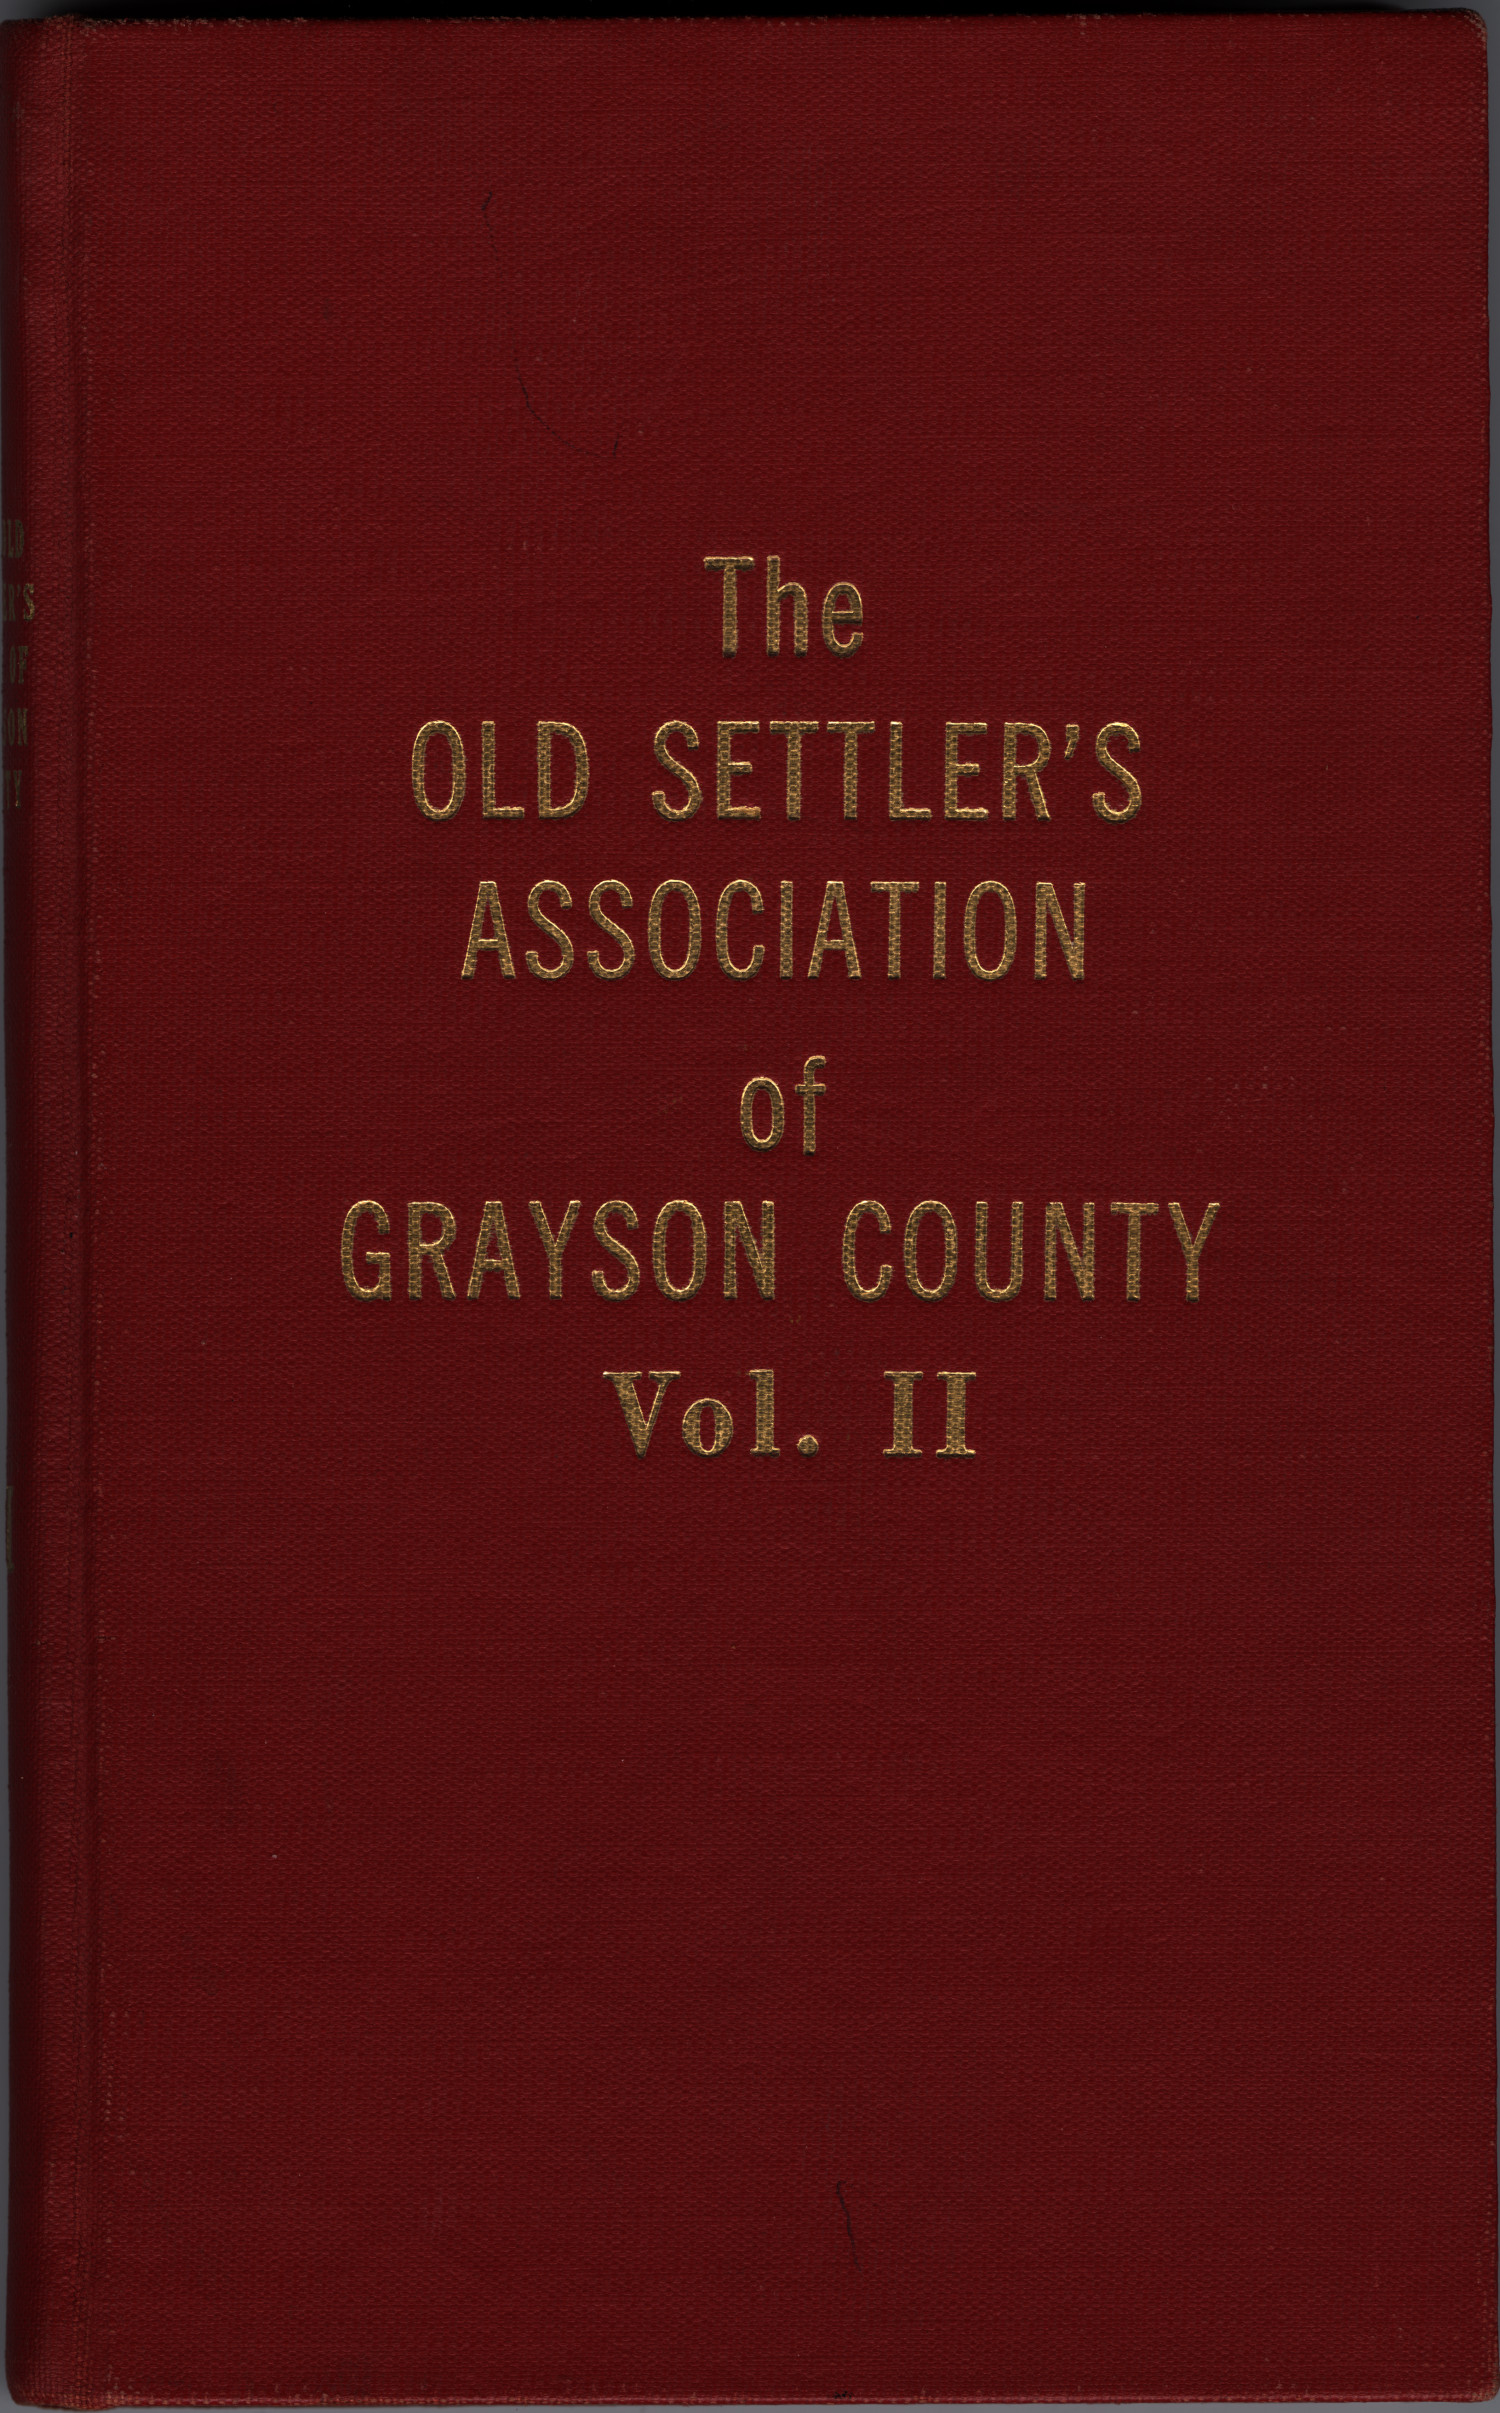 The Old Settler's Association of Grayson County, Volume 2.
                                                
                                                    [Sequence #]: 1 of 280
                                                